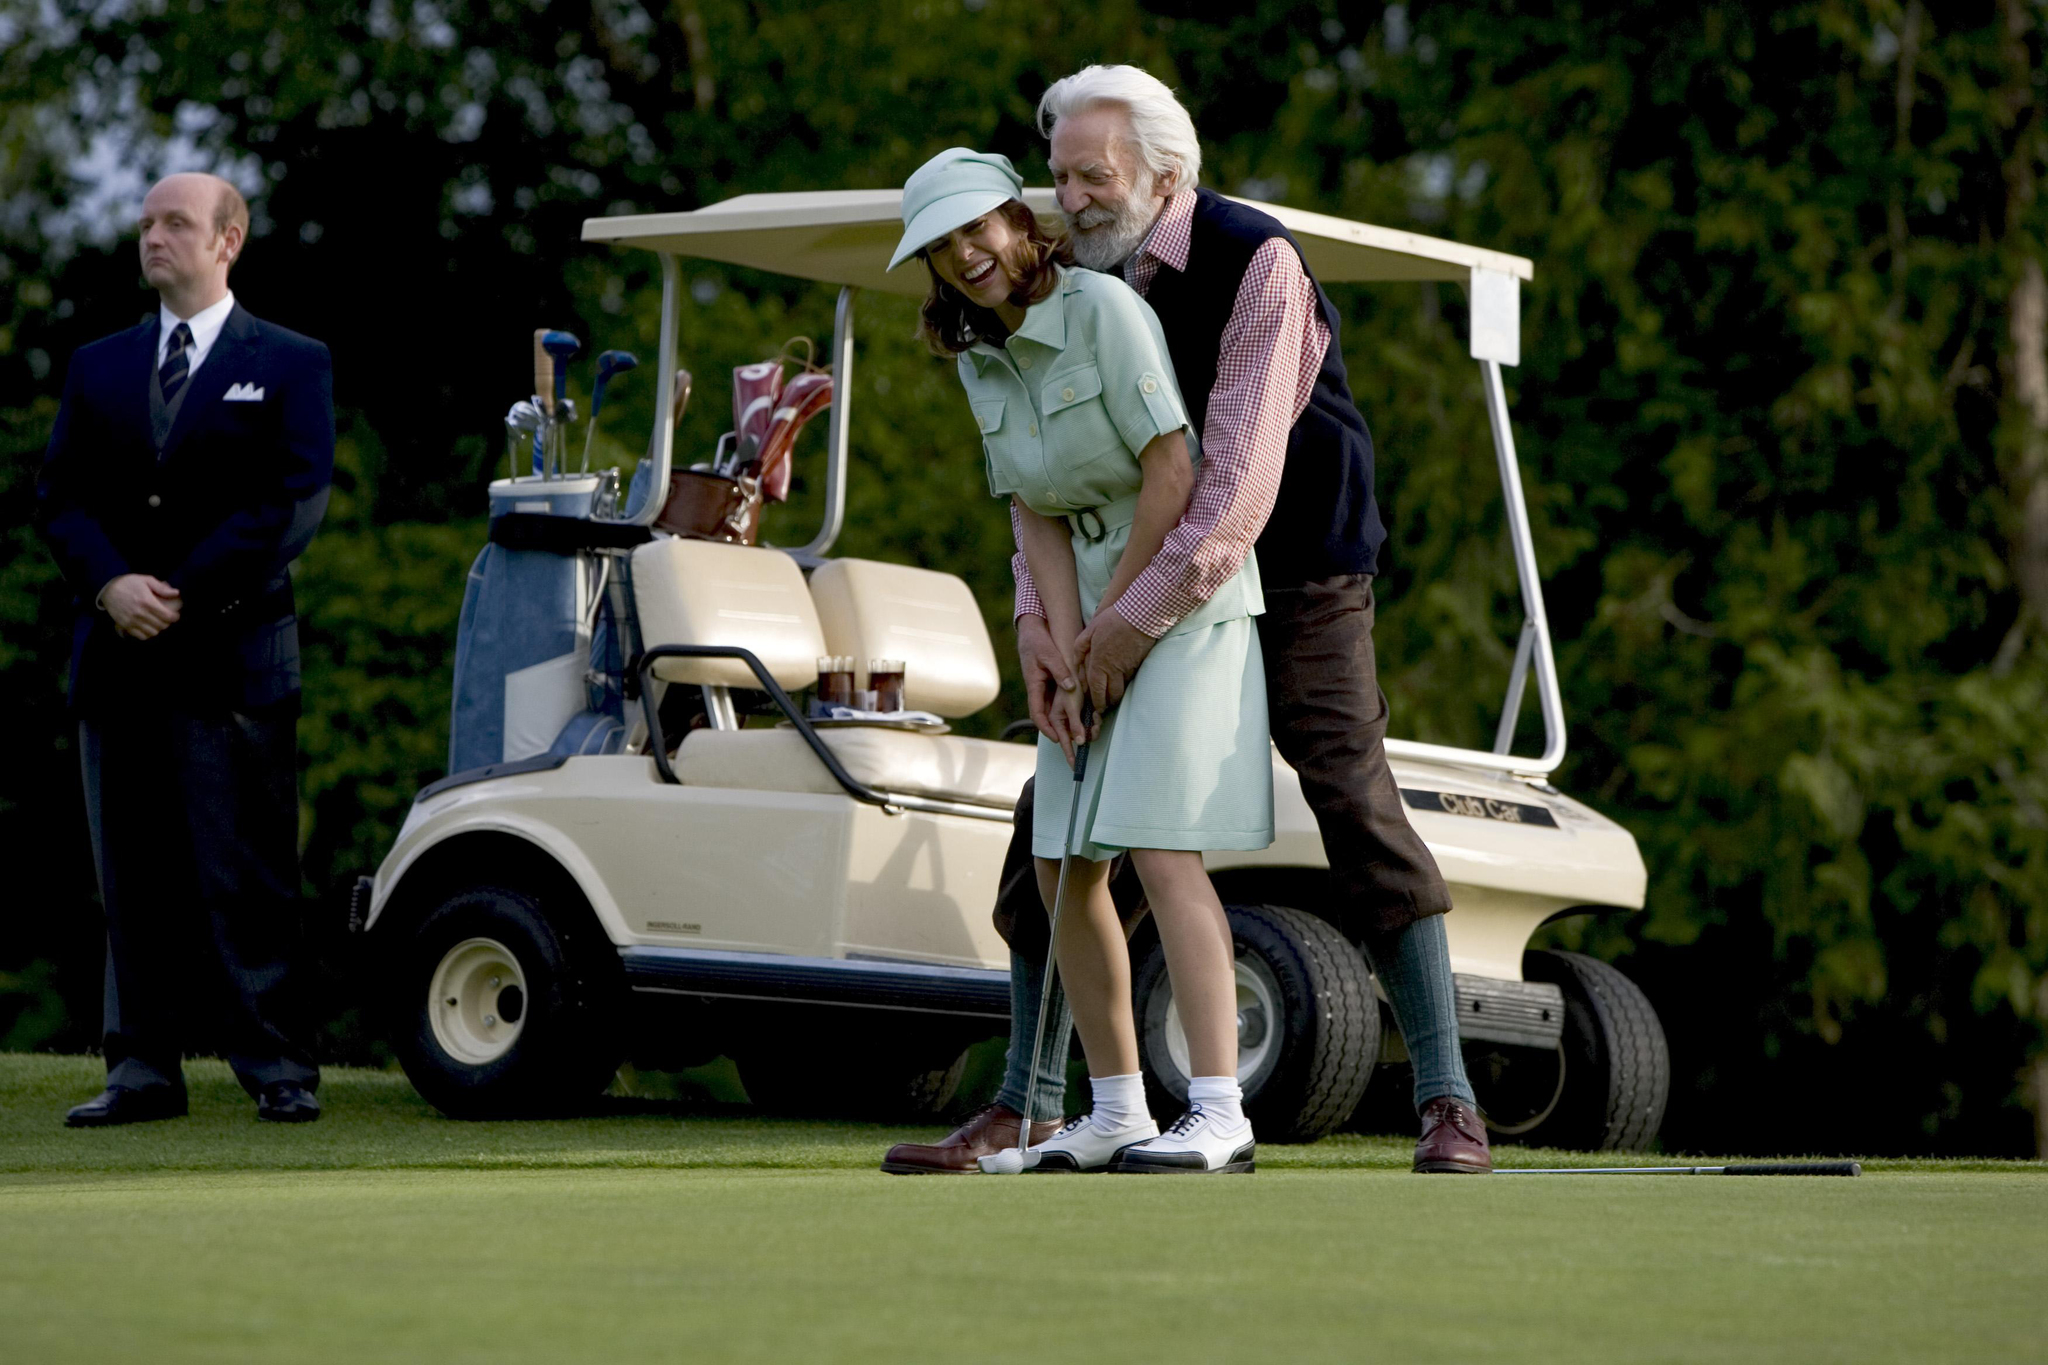 Still of Diane Lane and Donald Sutherland in Fierce People (2005)